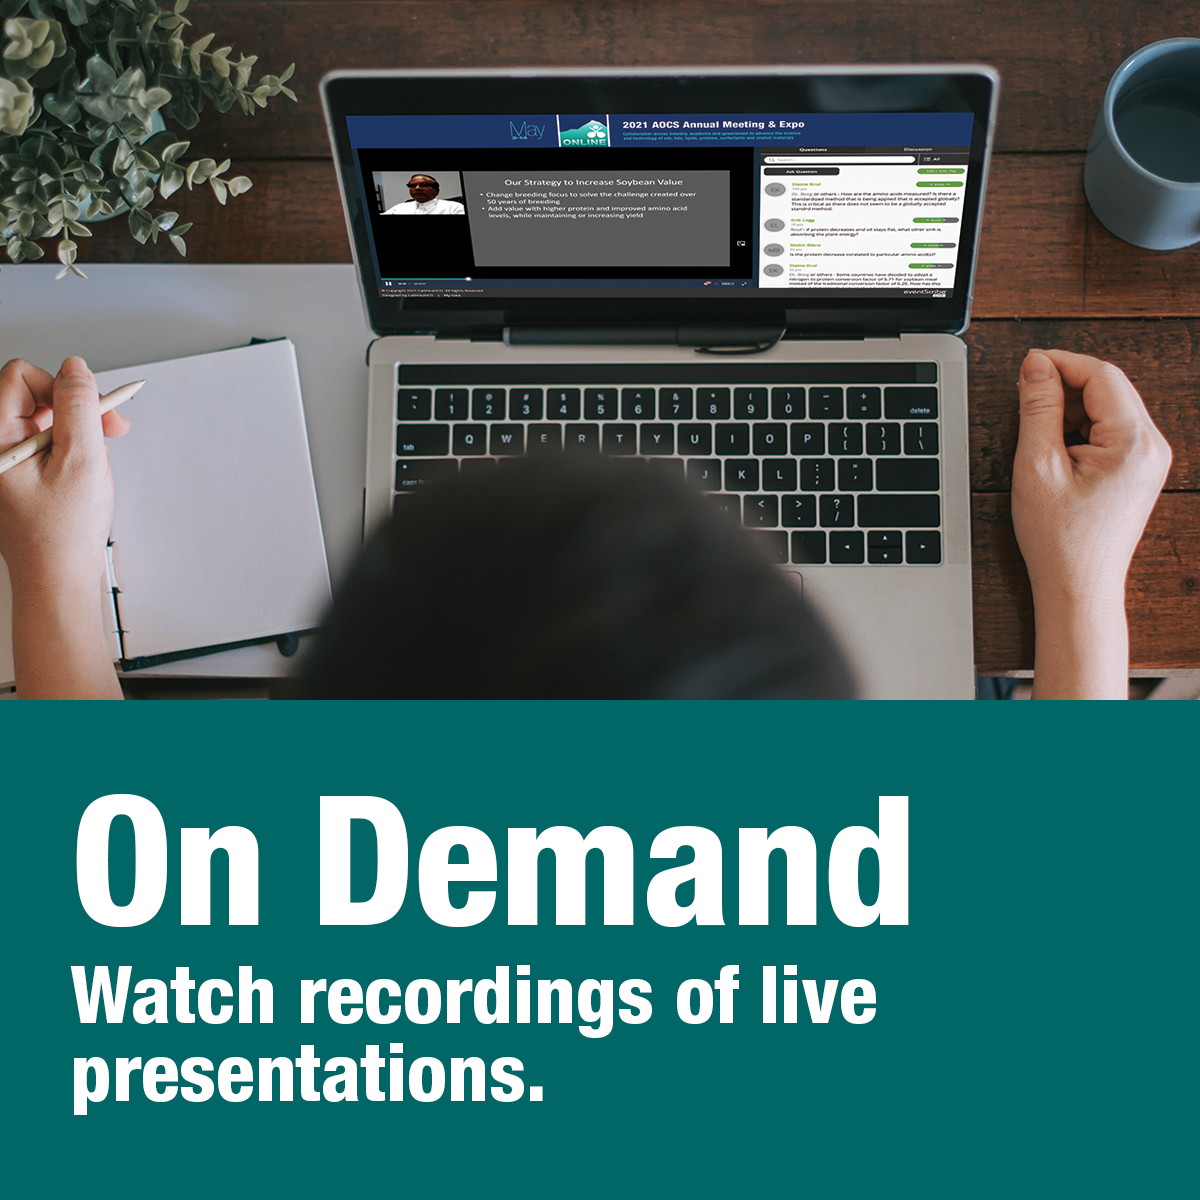 Browse on-demand recordings